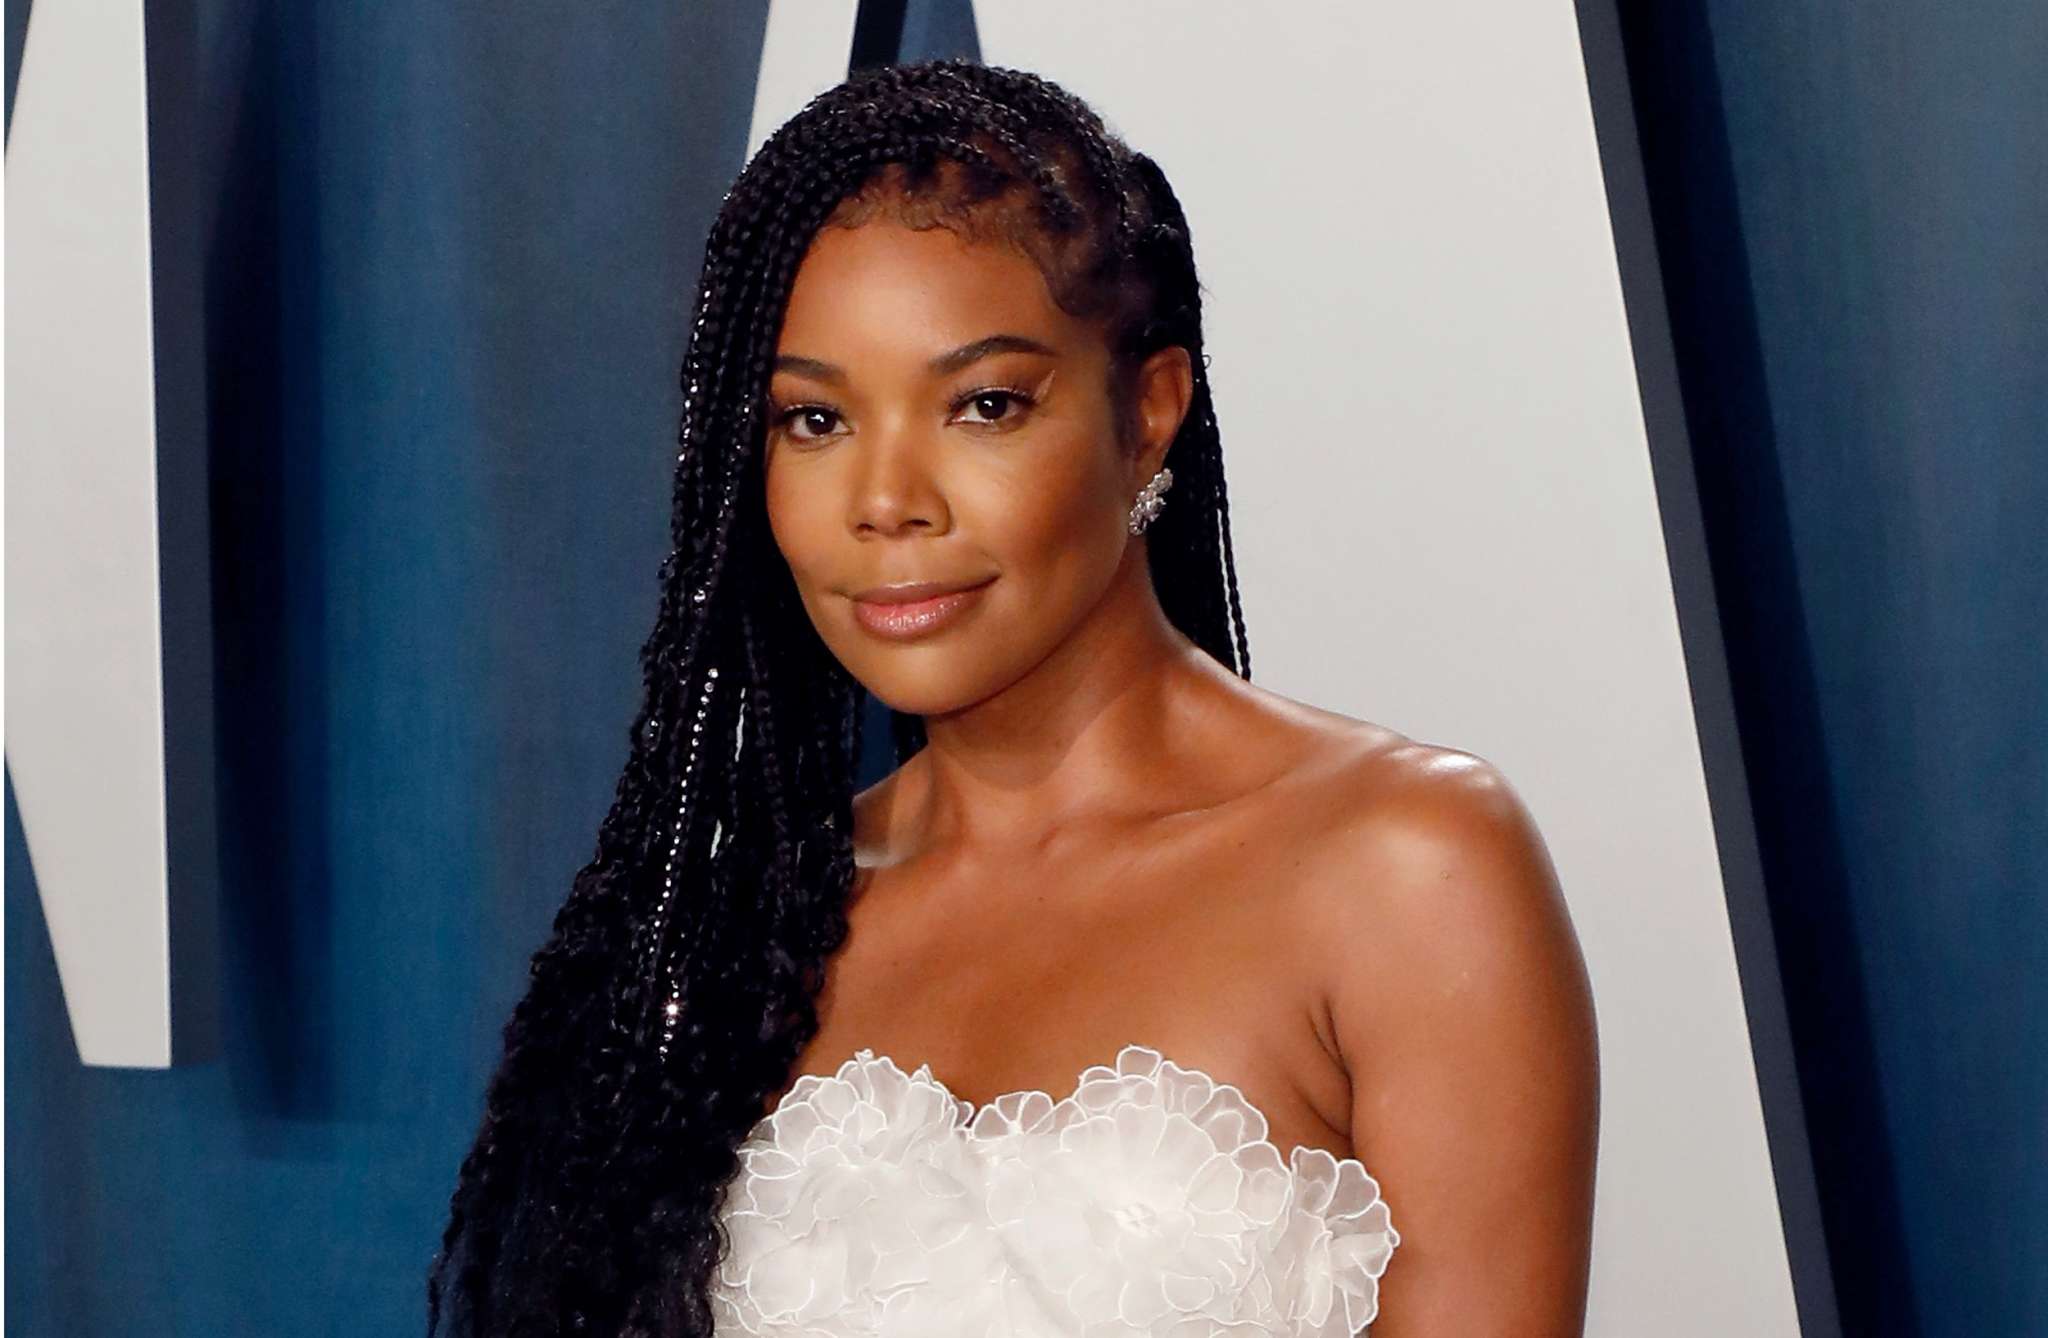 ”gabrielle-union-reveals-the-hardest-part-of-working-away-from-home”